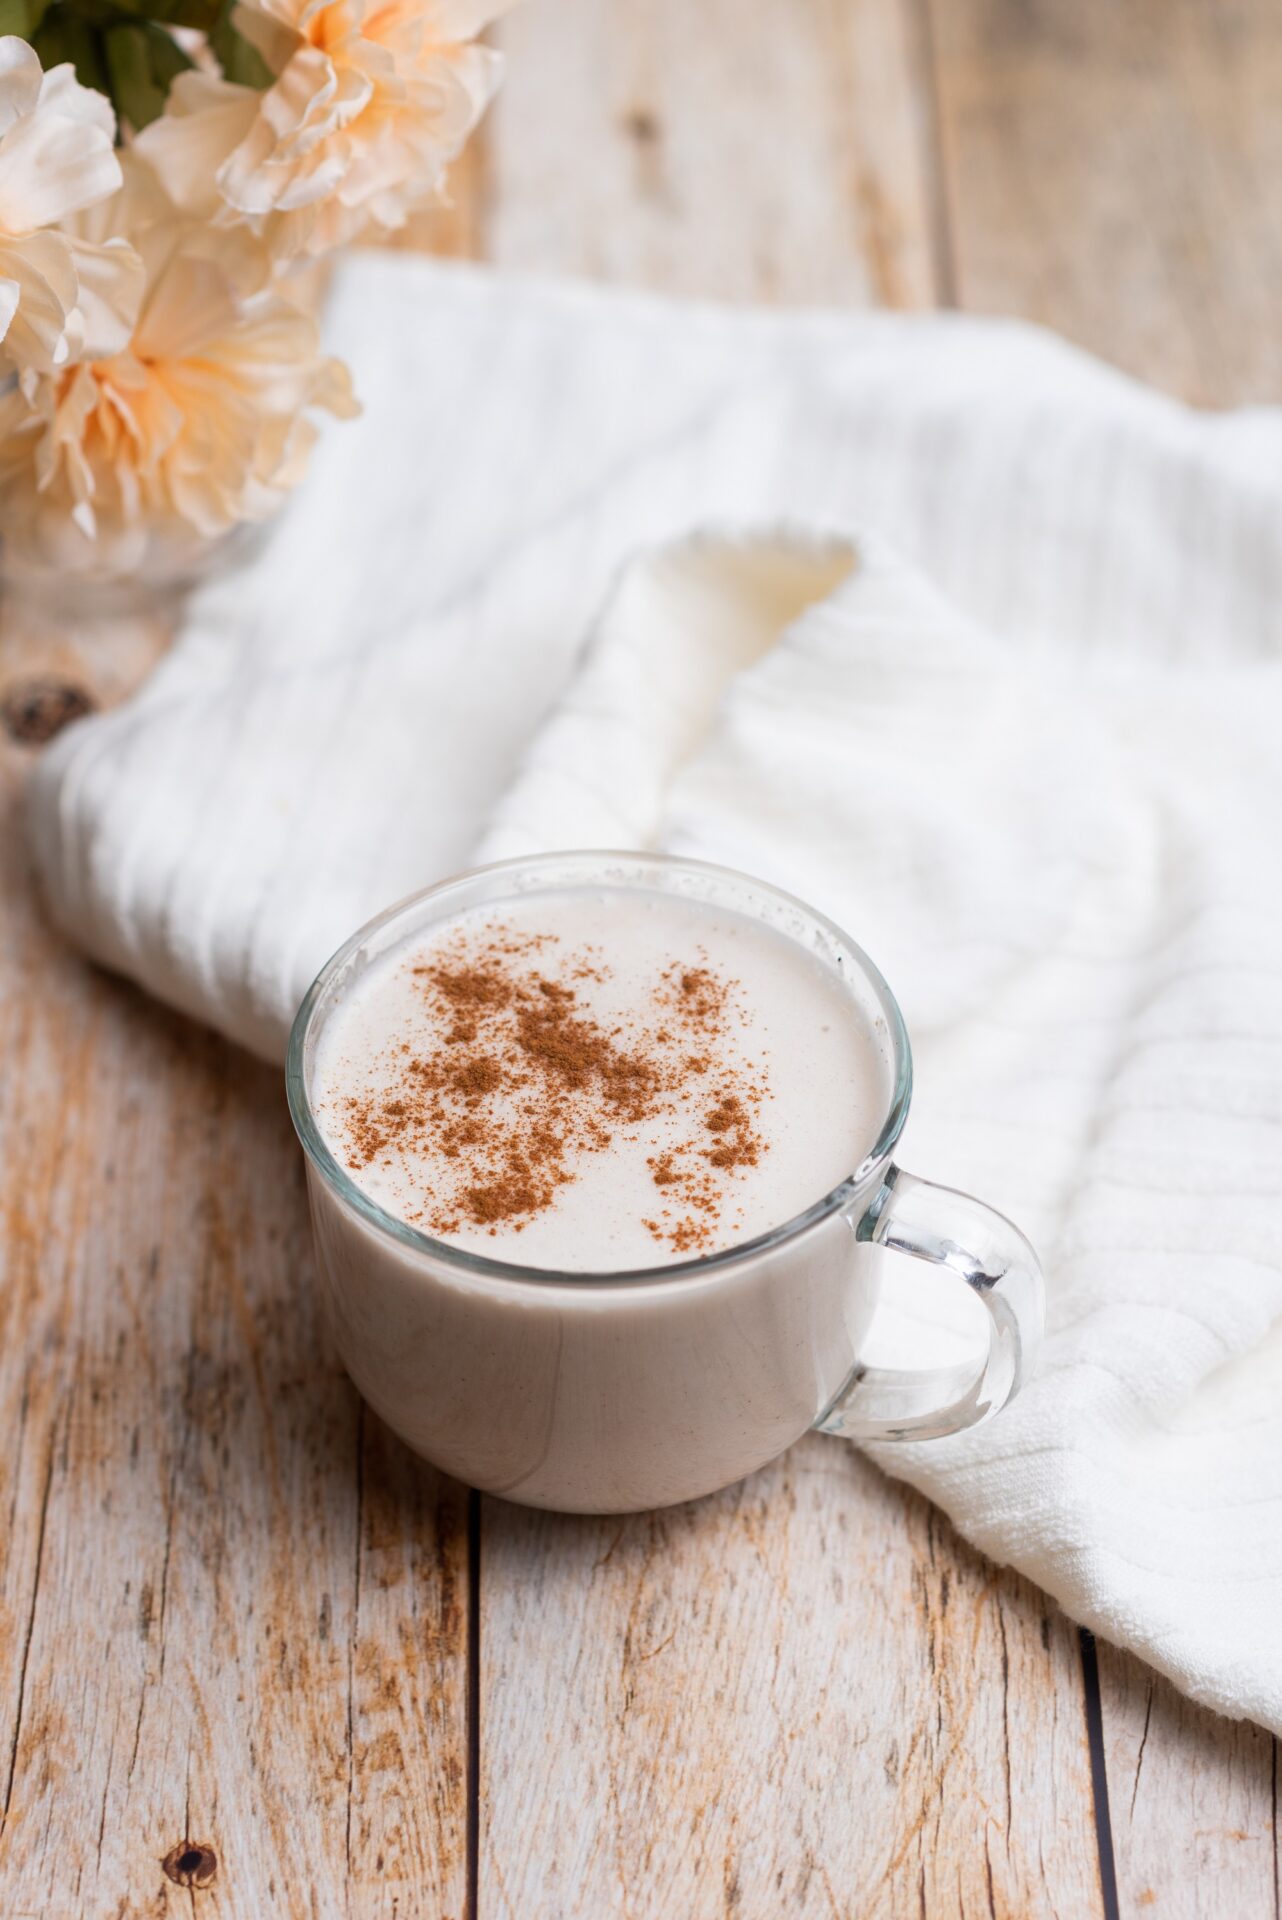 A glass of eggnog with cinnamon on a wooden table.